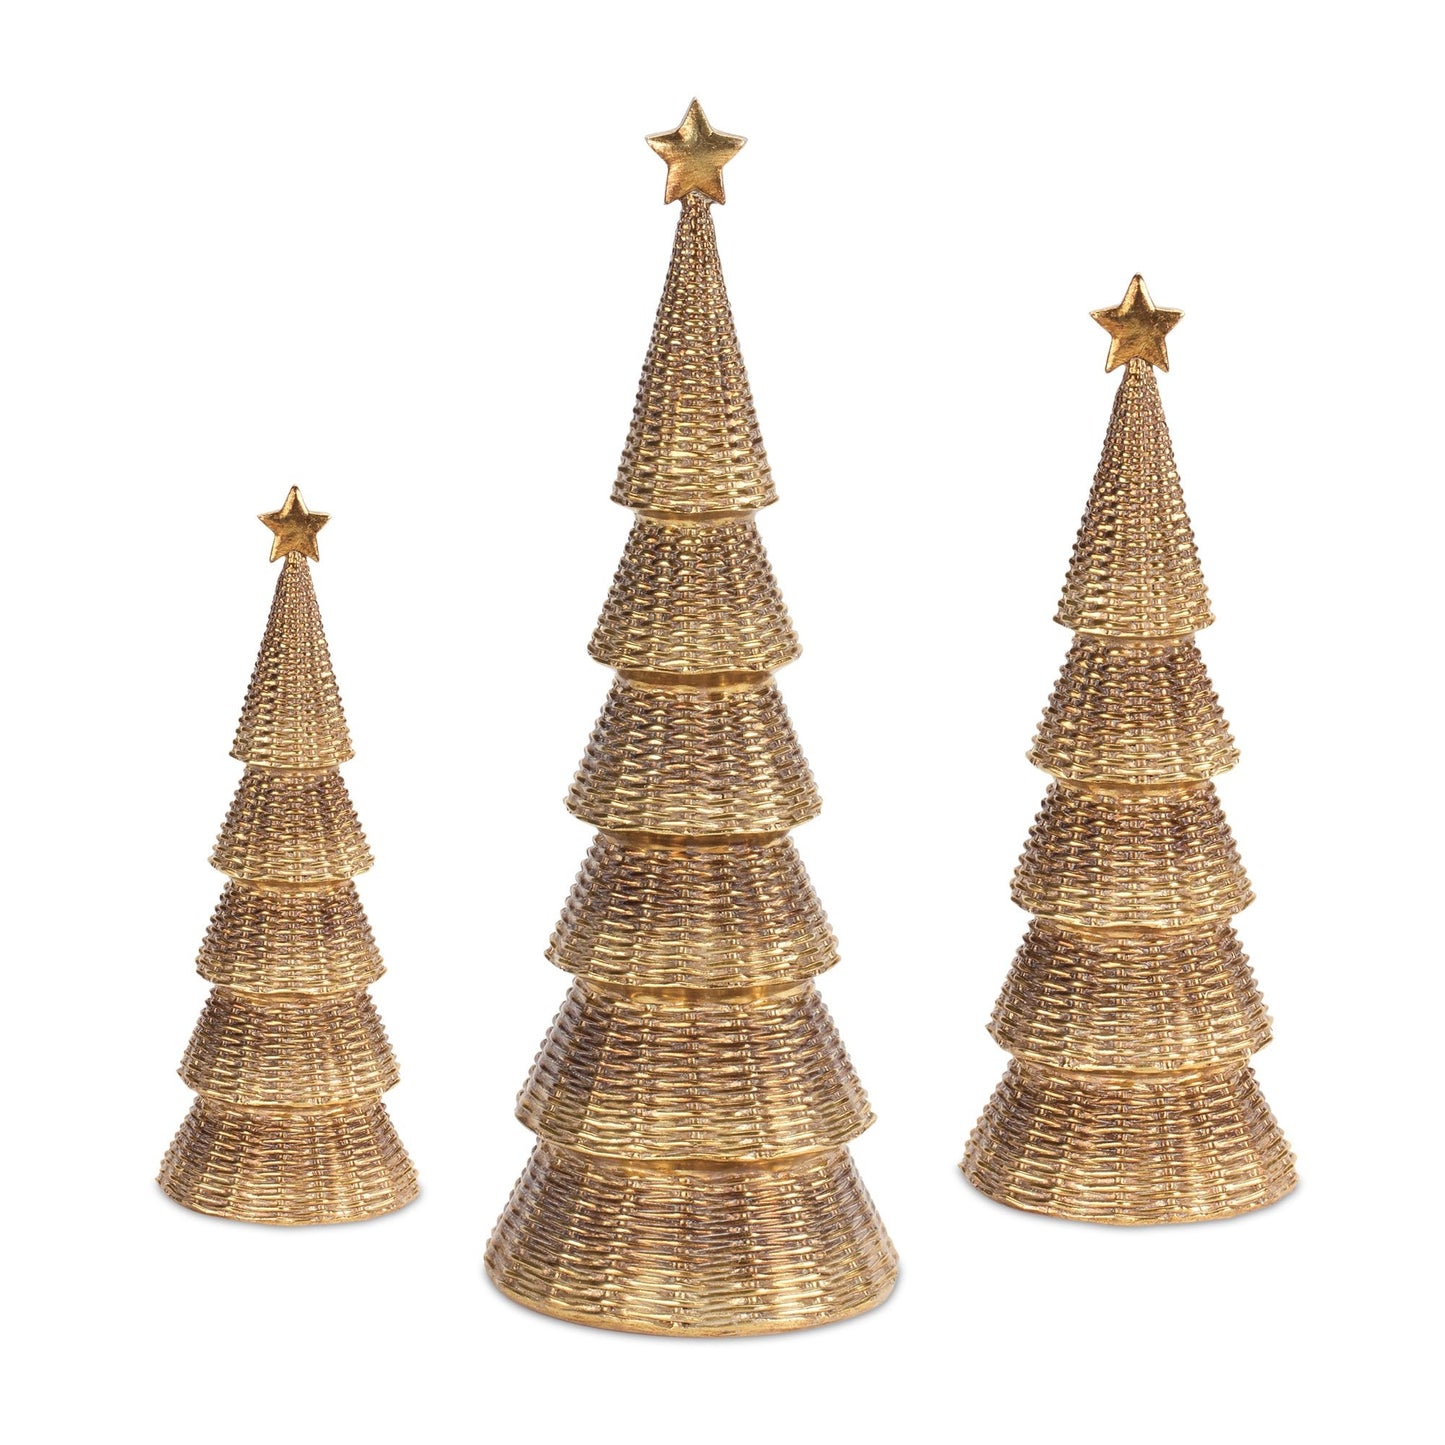 Gold Wicker Design Holiday Tree (Set of 3)